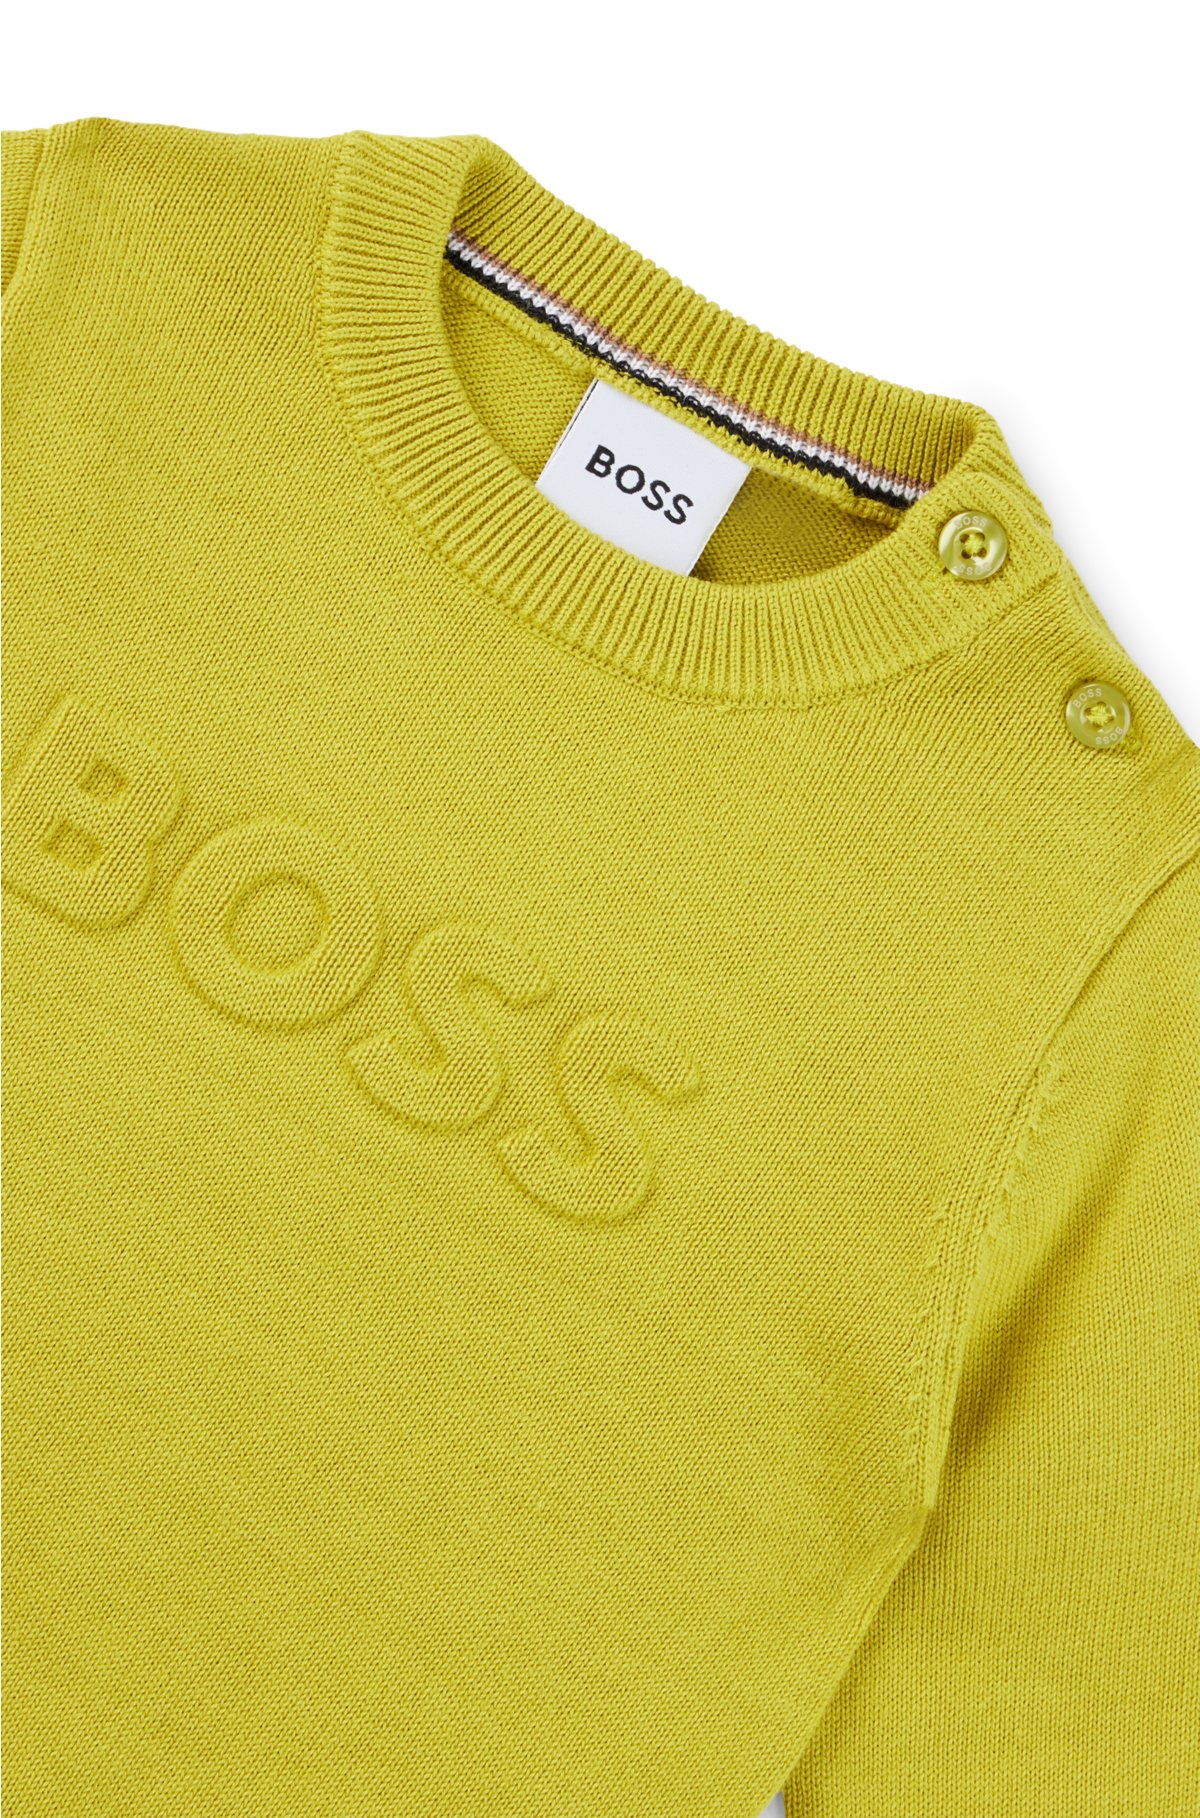 Kids' sweater in knitted cotton with embossed logo, Green